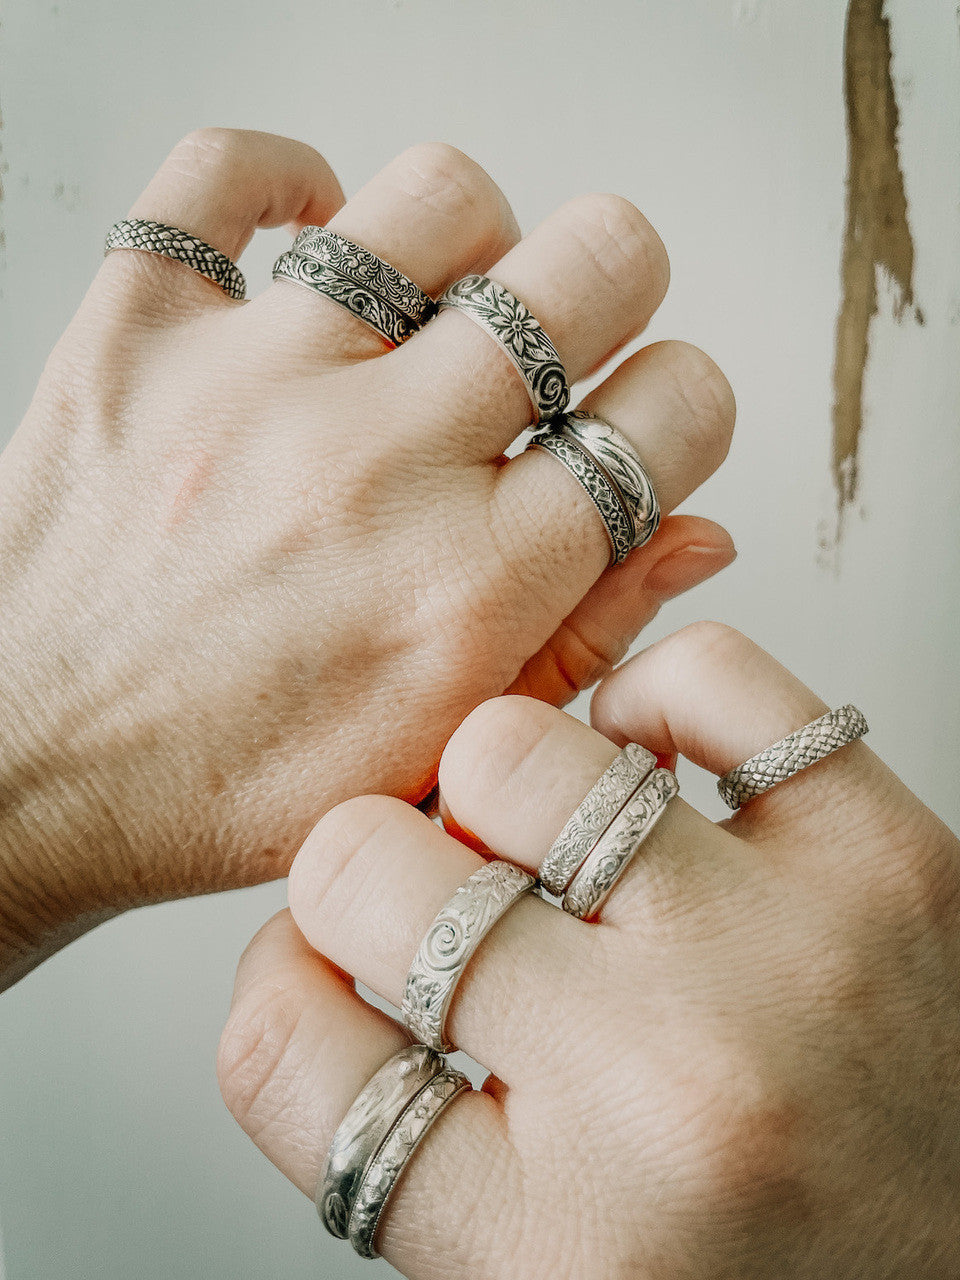 All statement stacking rings are hand-forged with .925 sterling silver with beautiful engravings